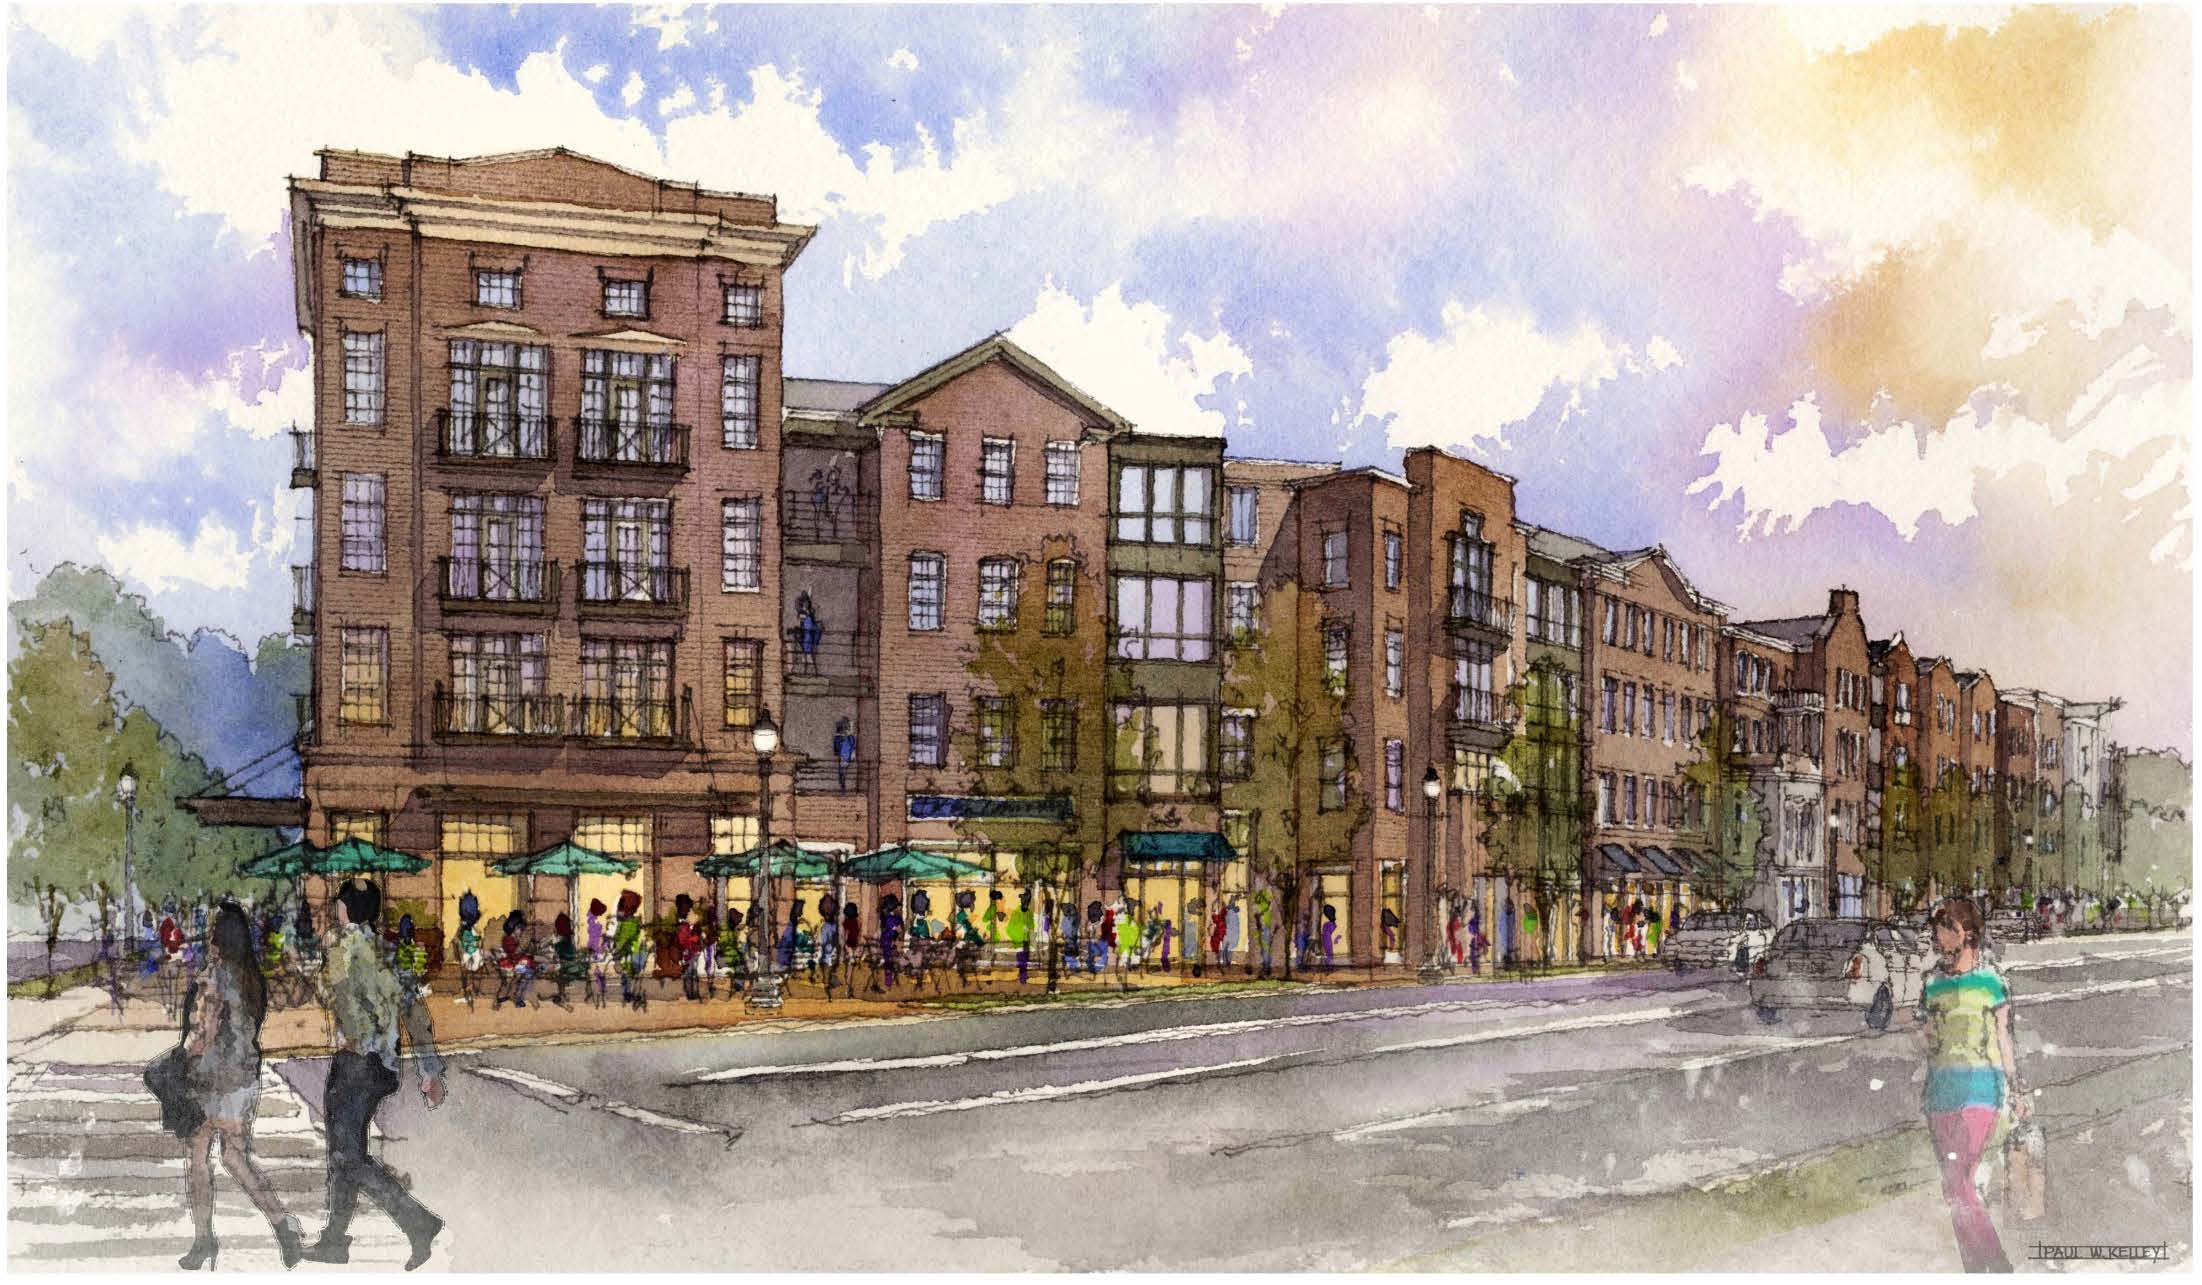 Planning Commission Public Hearing, March 17 – Zoning Changes and Waviers & Variances for development on the Old Phoenix Hill Tavern Site